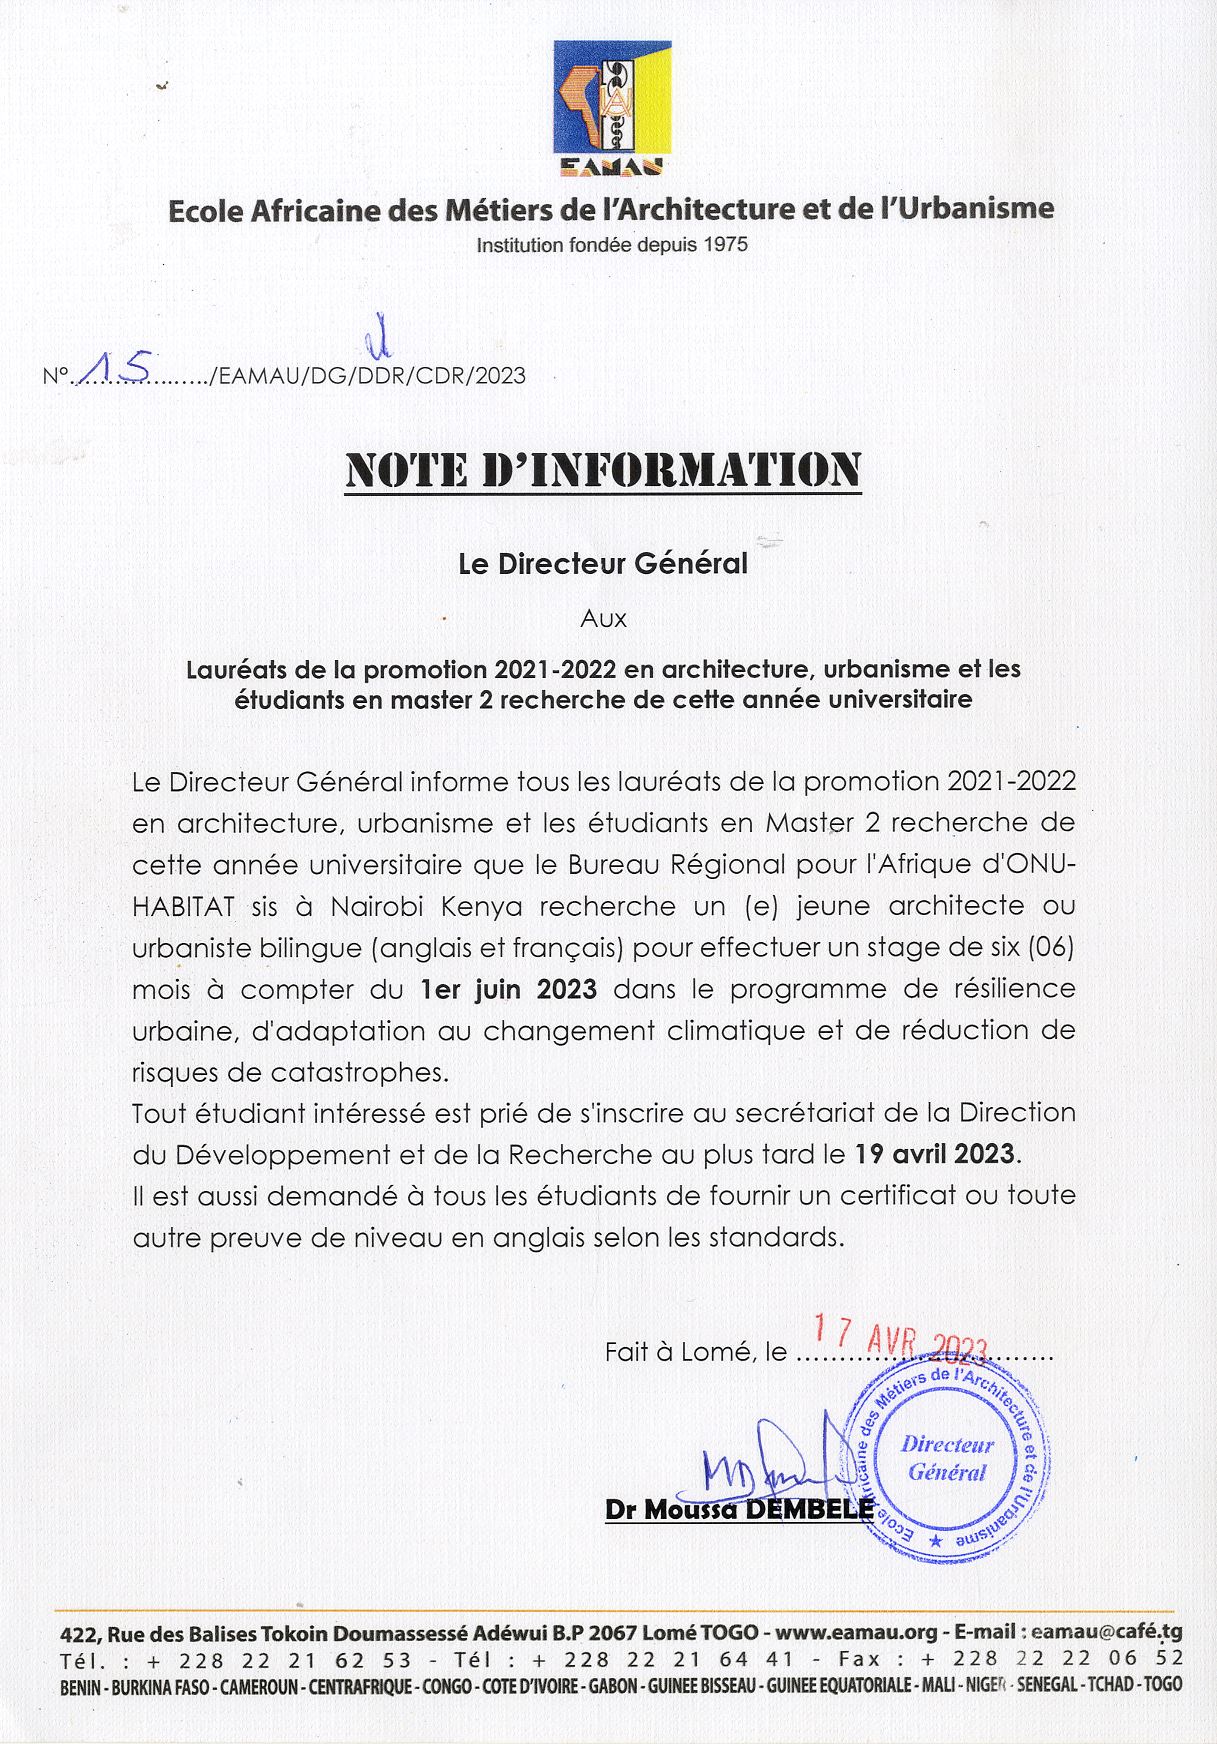 Note d’information